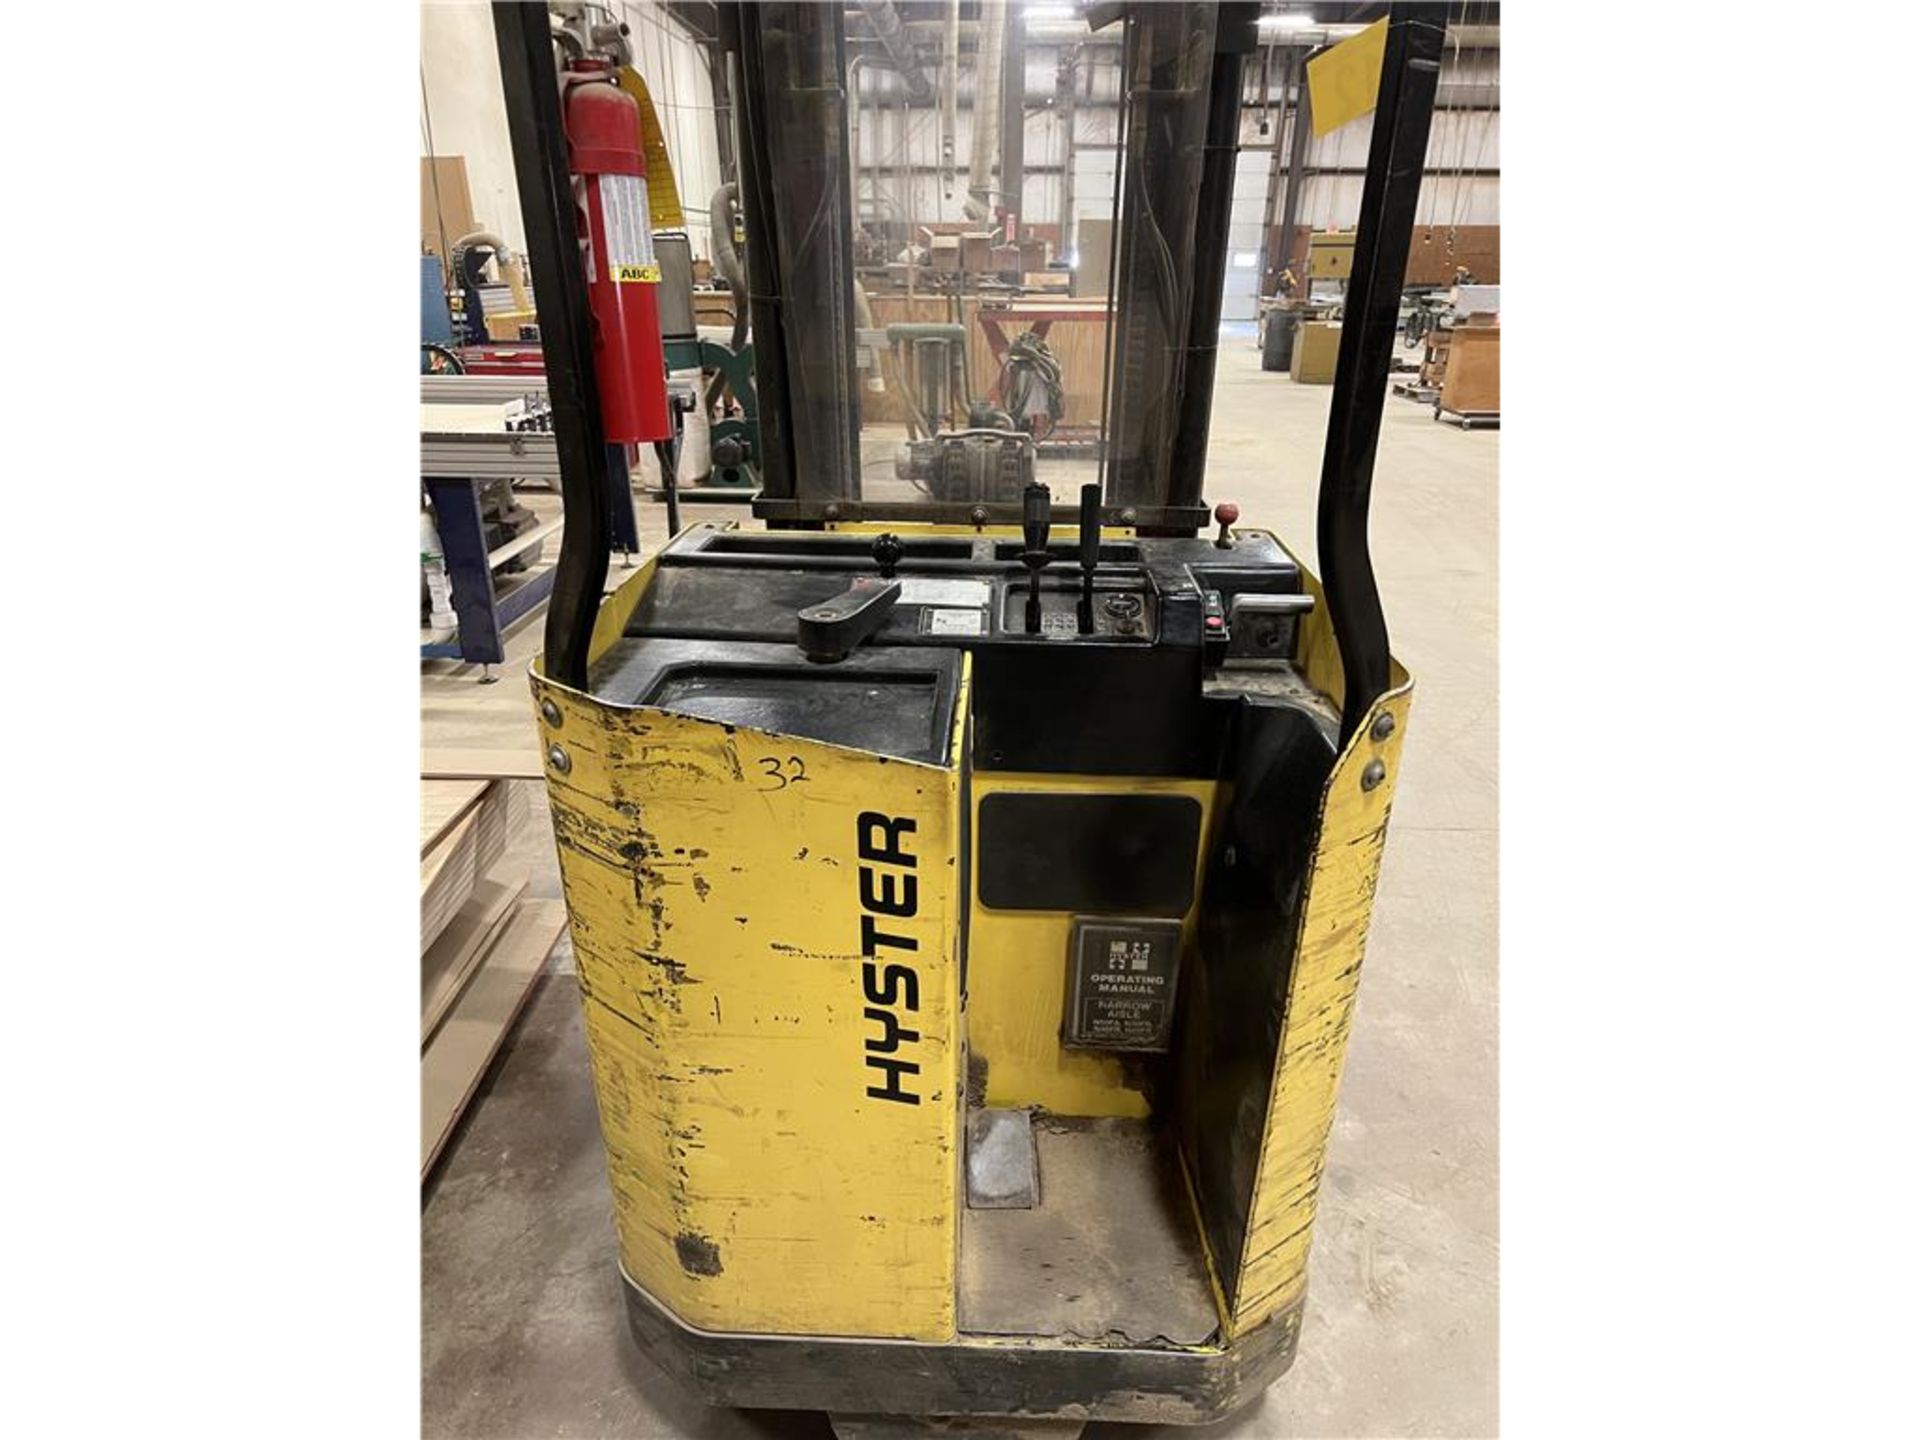 HYSTER N4DFR ELECTRIC LIFT TRUCK, 1,866 HOURS, S/N: D138403292R, 3-STAGE MAST 212", 3PH - Image 2 of 7